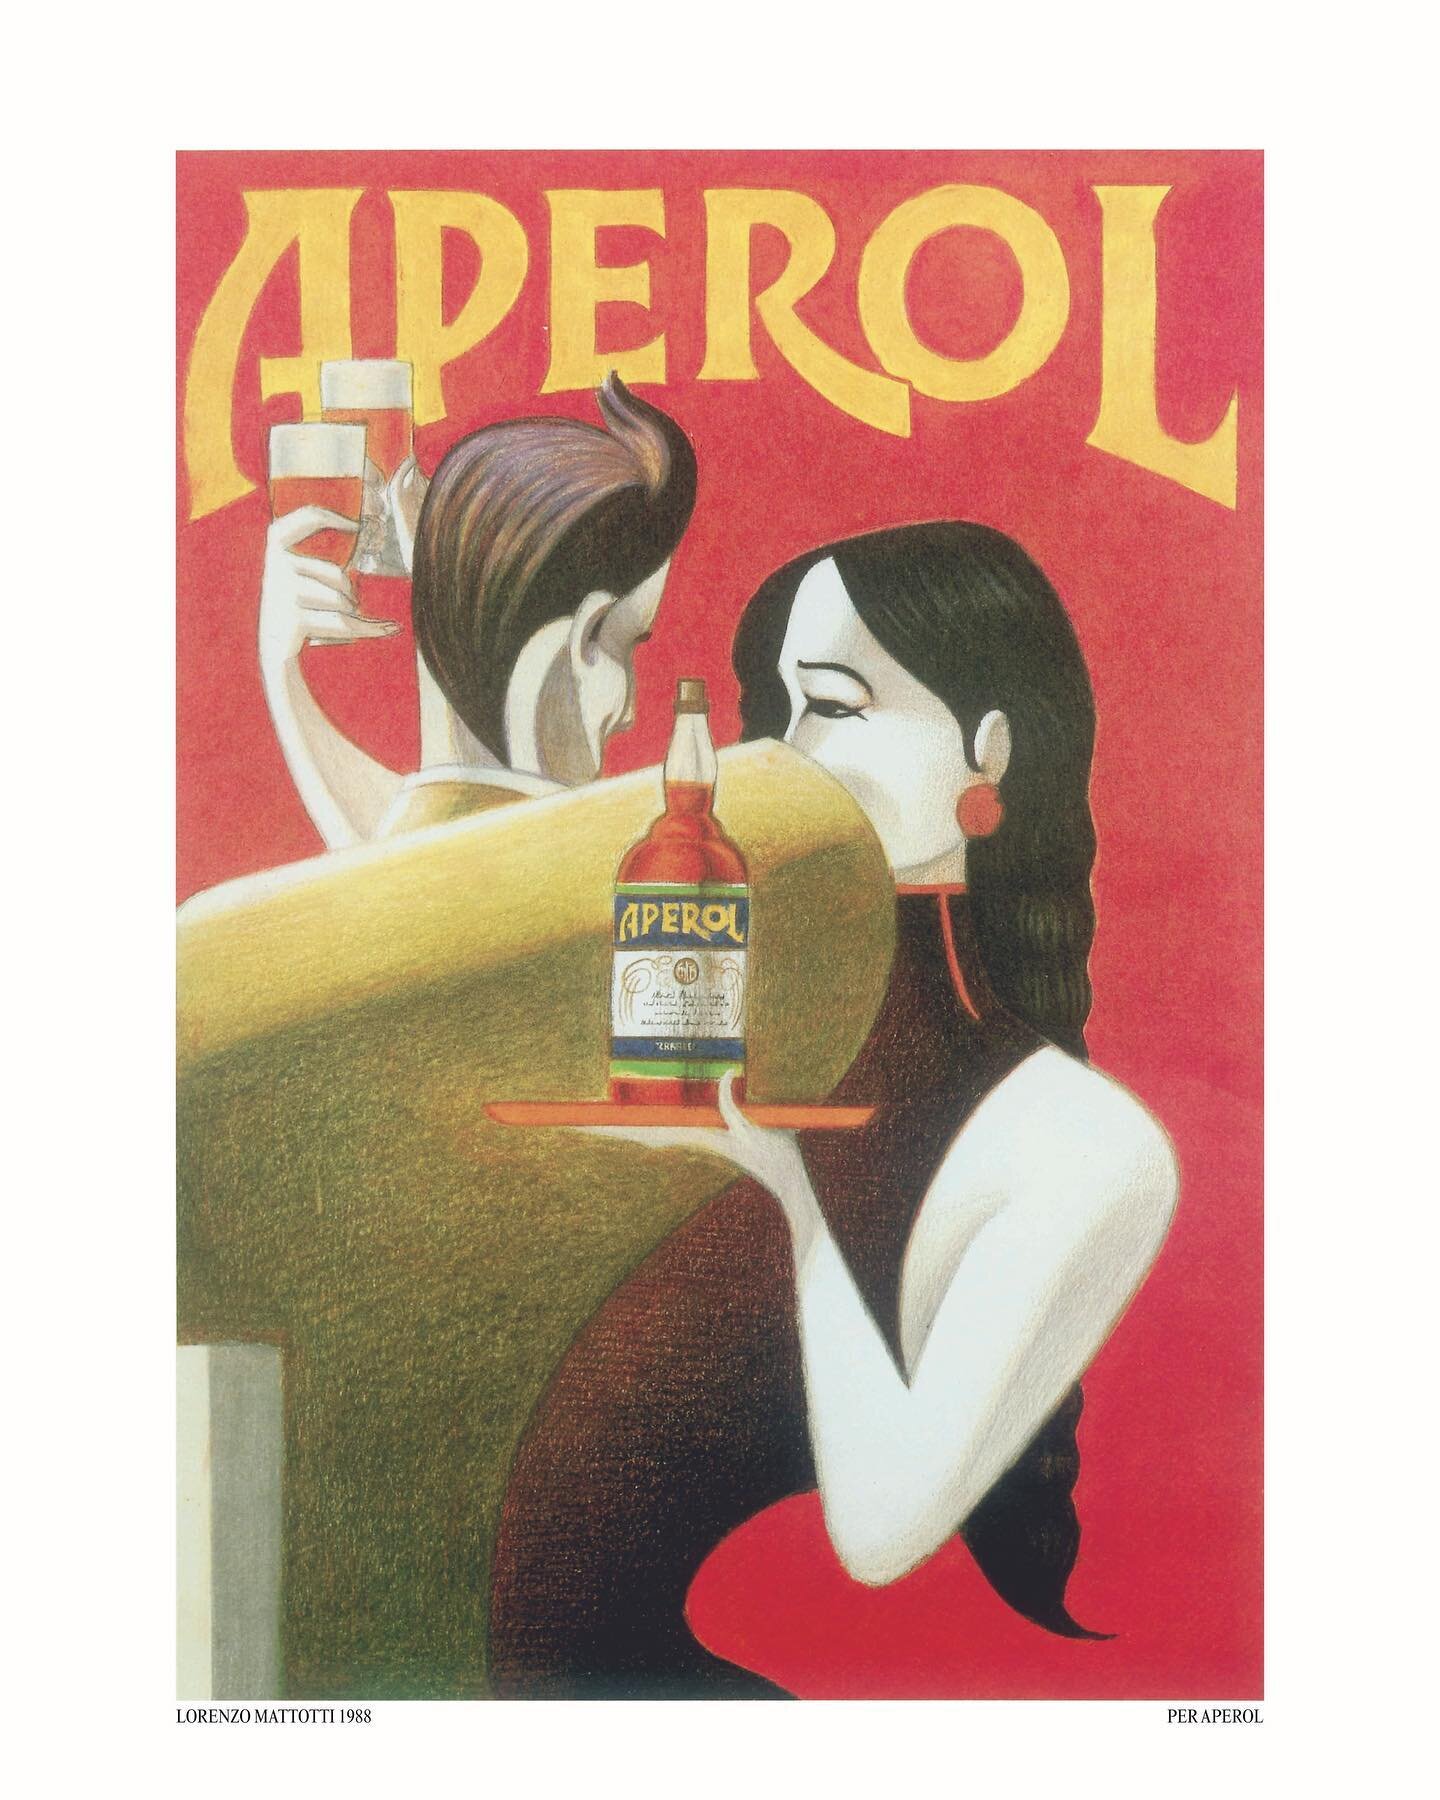 ☀️🍹It&rsquo;s Happy Hour time with  2 for 1 on our cocktails including Aperol Spritz - 7 days from 4-6pm 👌 #happyhour #cocktails #aperol #aperolspritz #2for1 #bathdrinks #batheats #poster #graphicdesign #cocktailbar #cocktails #happyhours #retropos